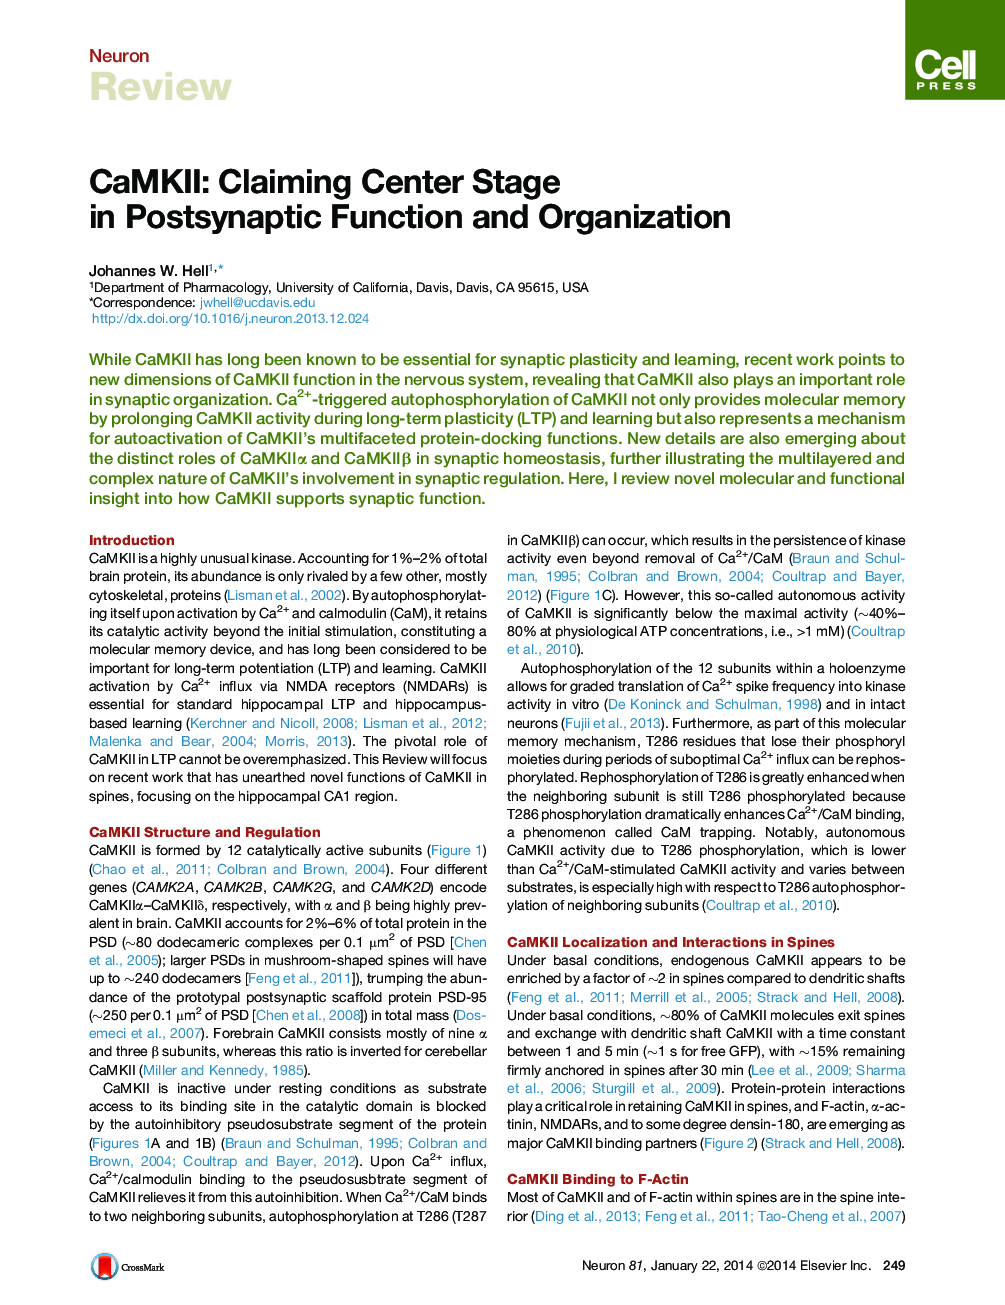 CaMKII: Claiming Center Stage in Postsynaptic Function and Organization